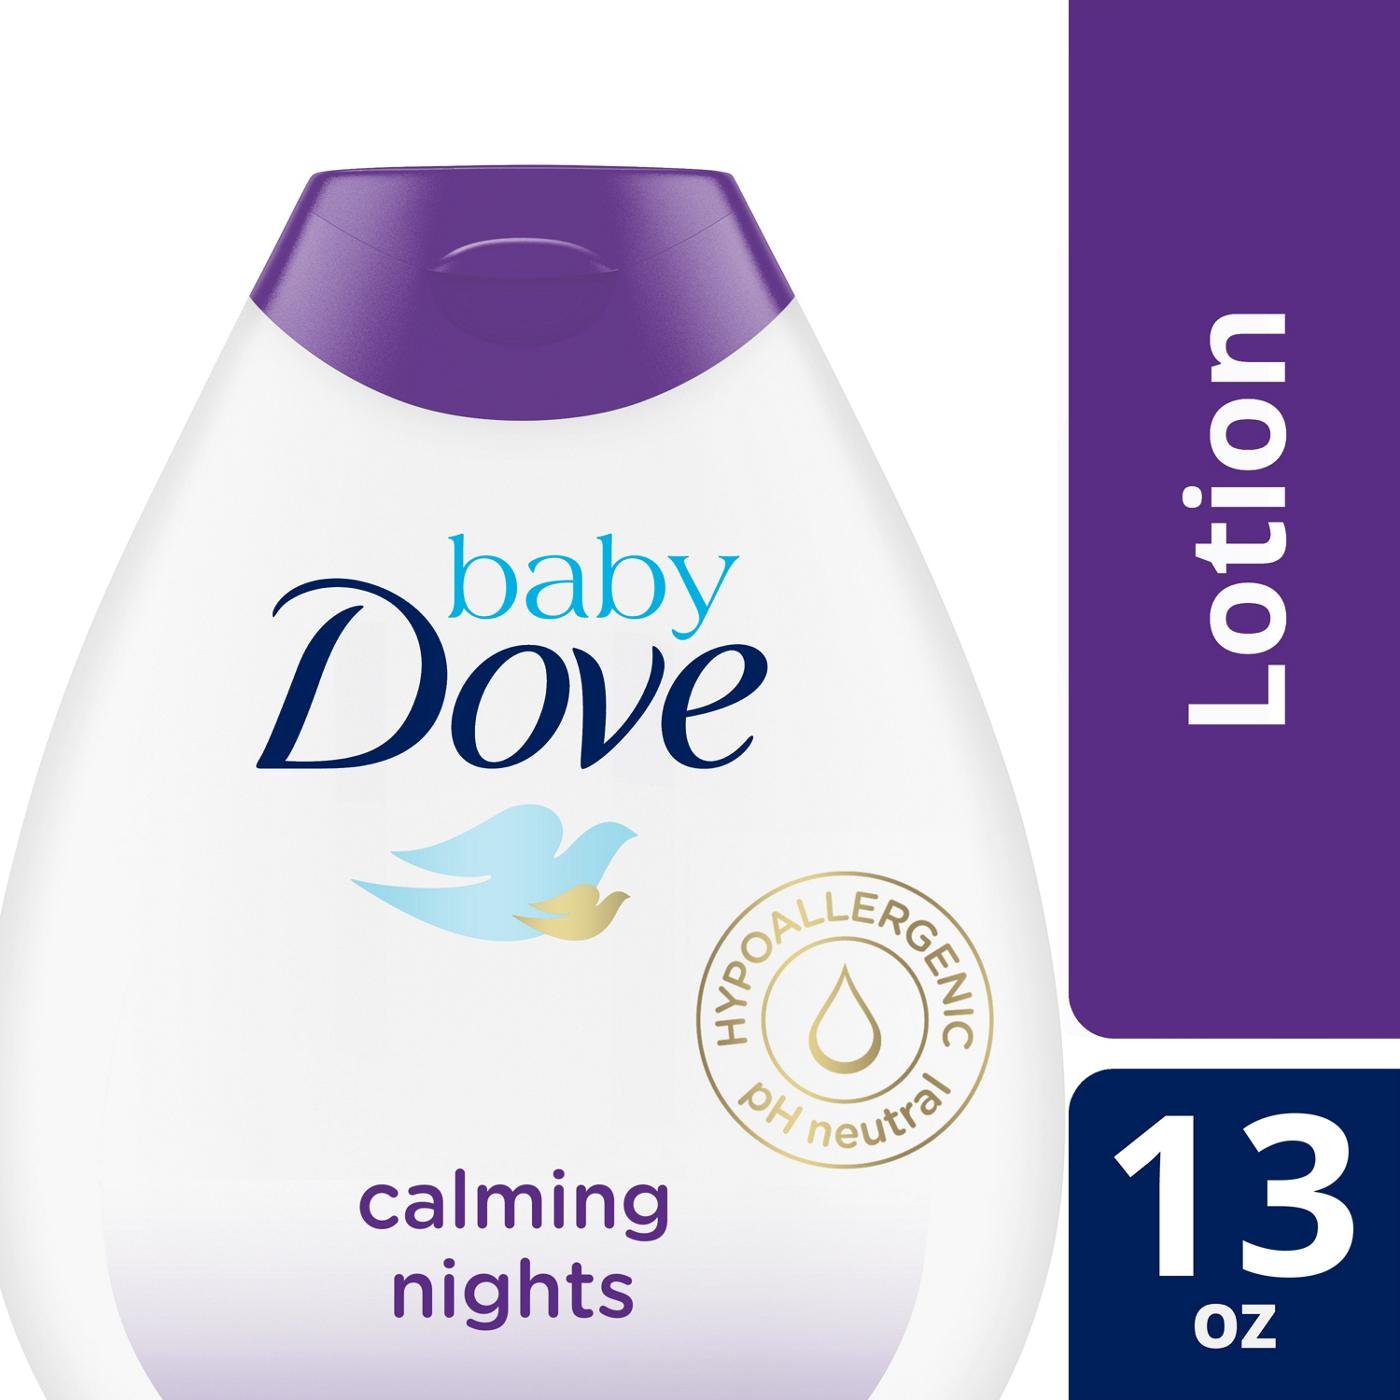 Baby Dove Calming Nights Lotion; image 2 of 4